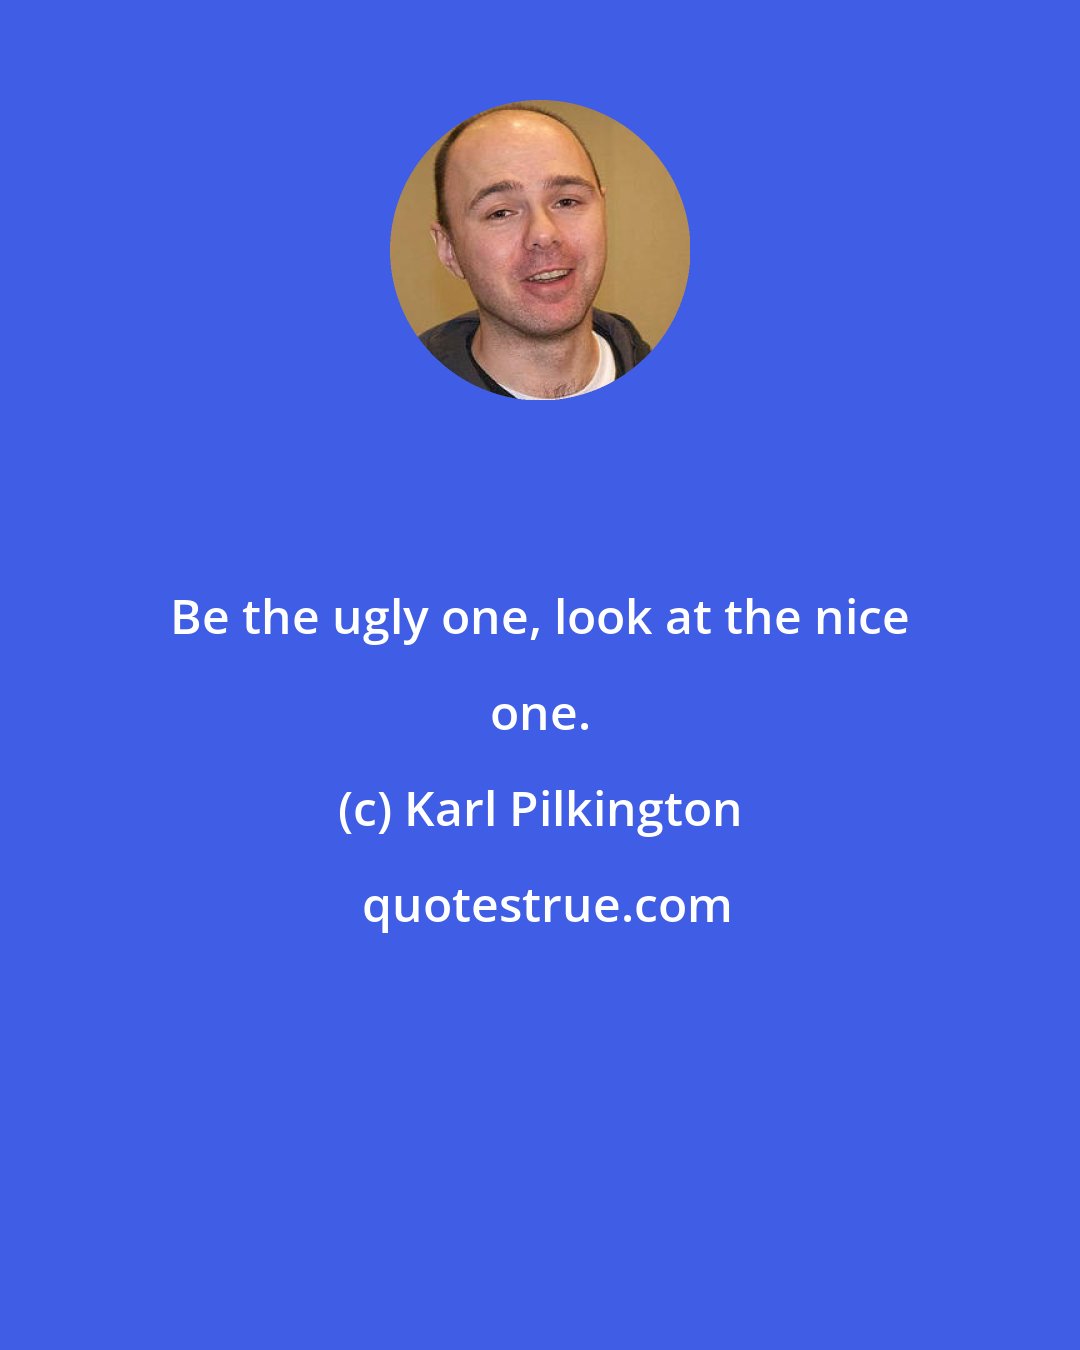 Karl Pilkington: Be the ugly one, look at the nice one.